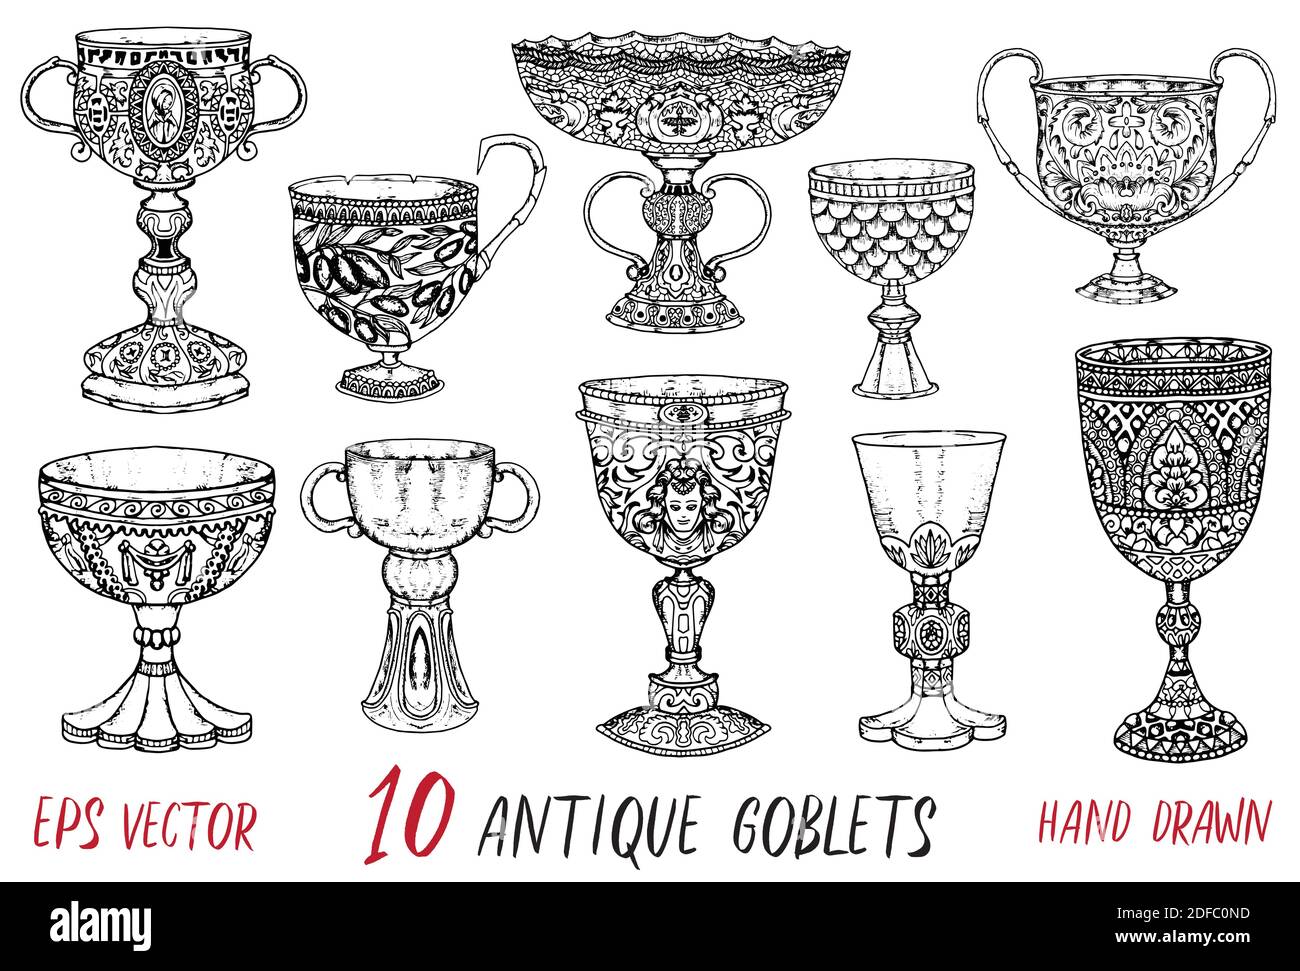 Vintage collection with ten antique goblets. Hand drawn doodle engraved illustration with graphic drawings Stock Vector